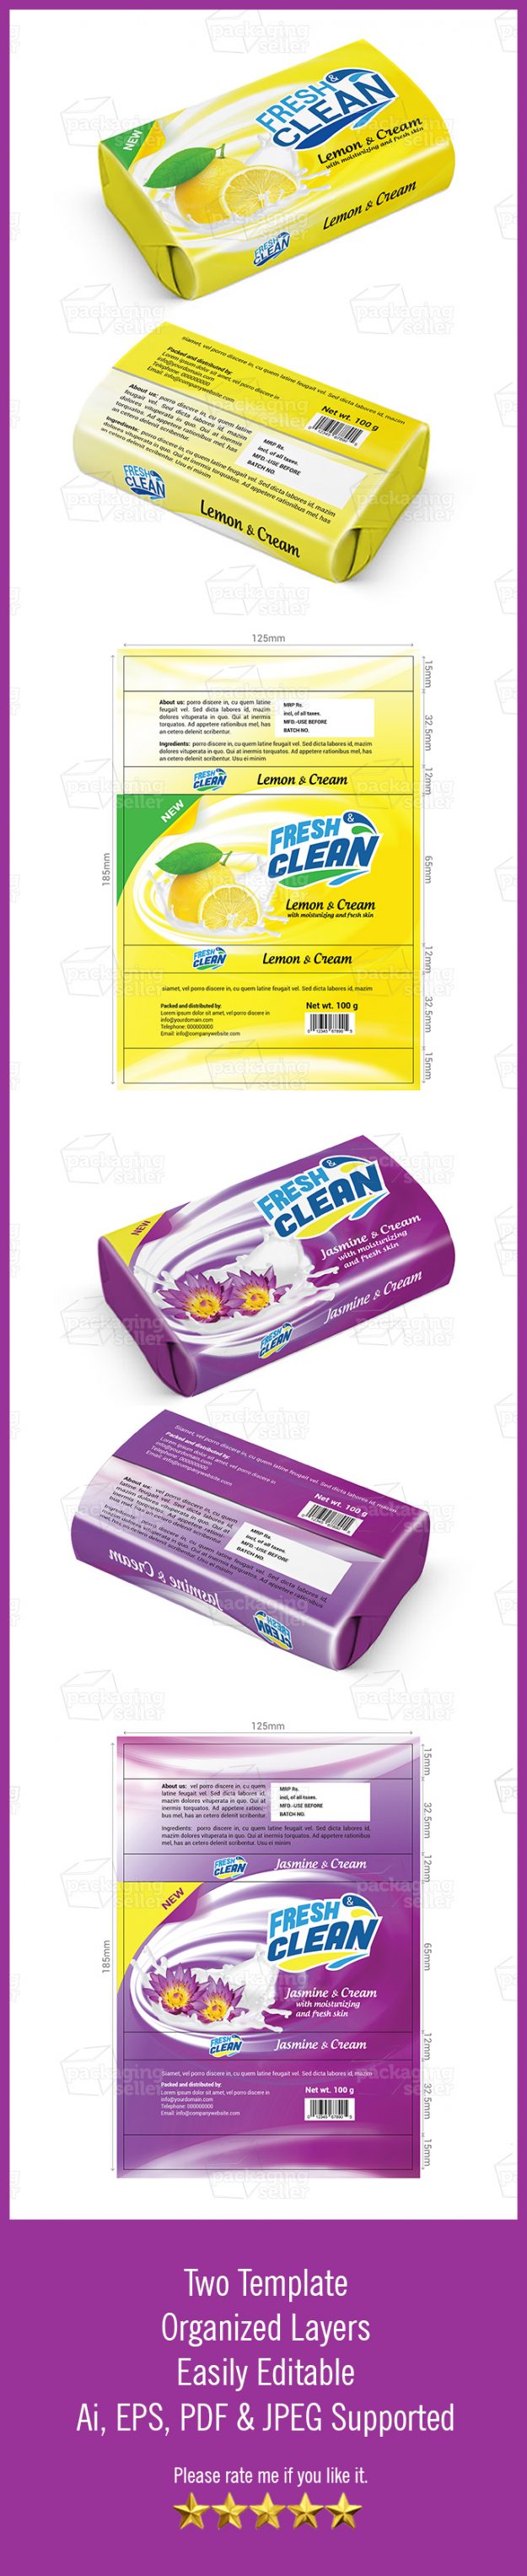 Soap Packaging Template Design